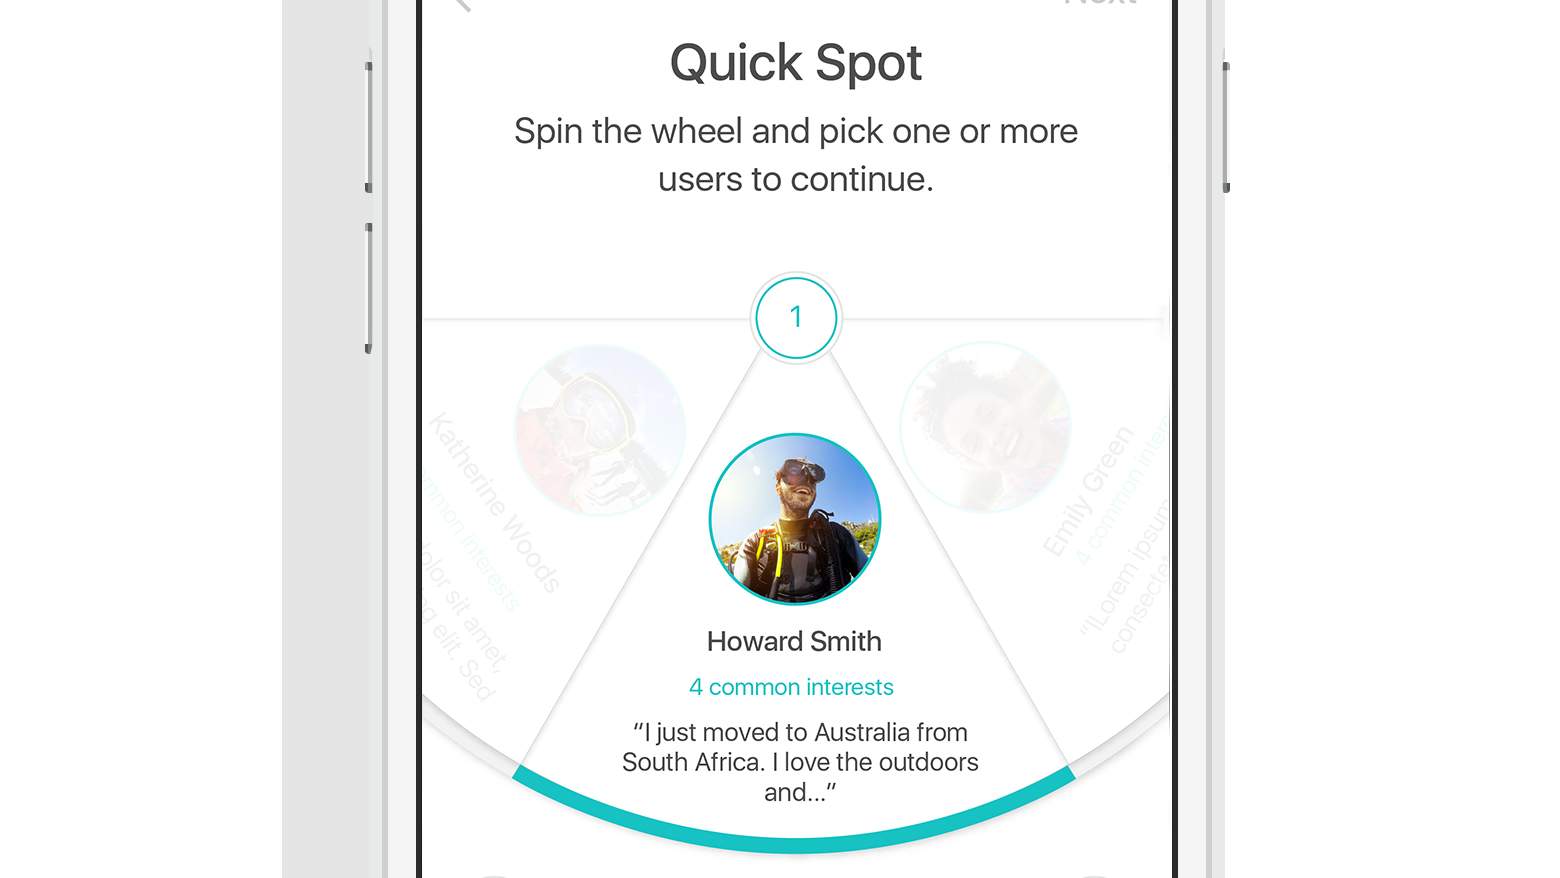 New Friend-Matching Social Media Network Hobspot is Tinder for Mates